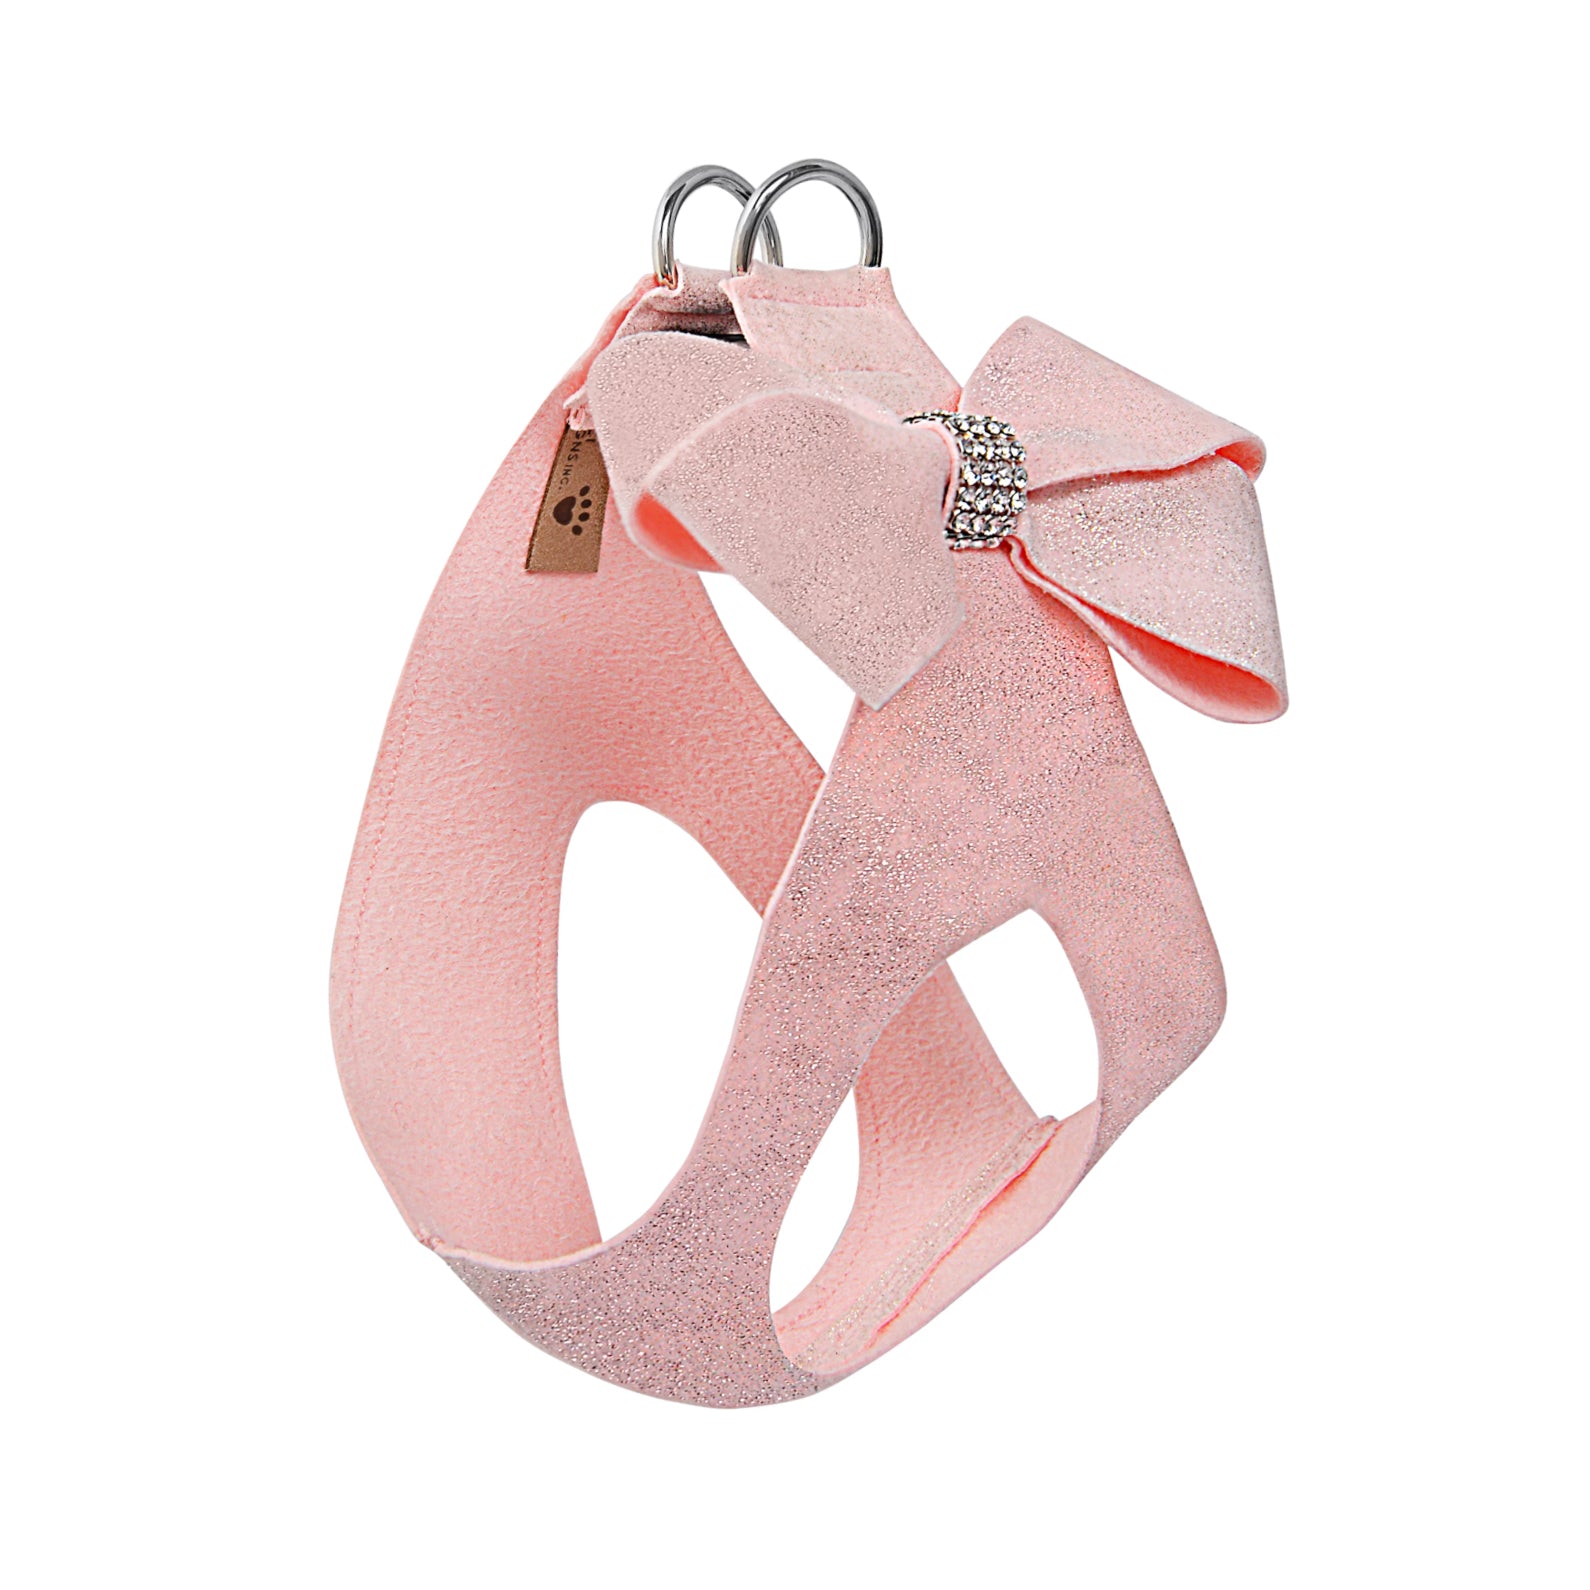 Pet Boutique - Dog Harness - Nouveau Bow Step-in Dog Harness by Susan Lanci